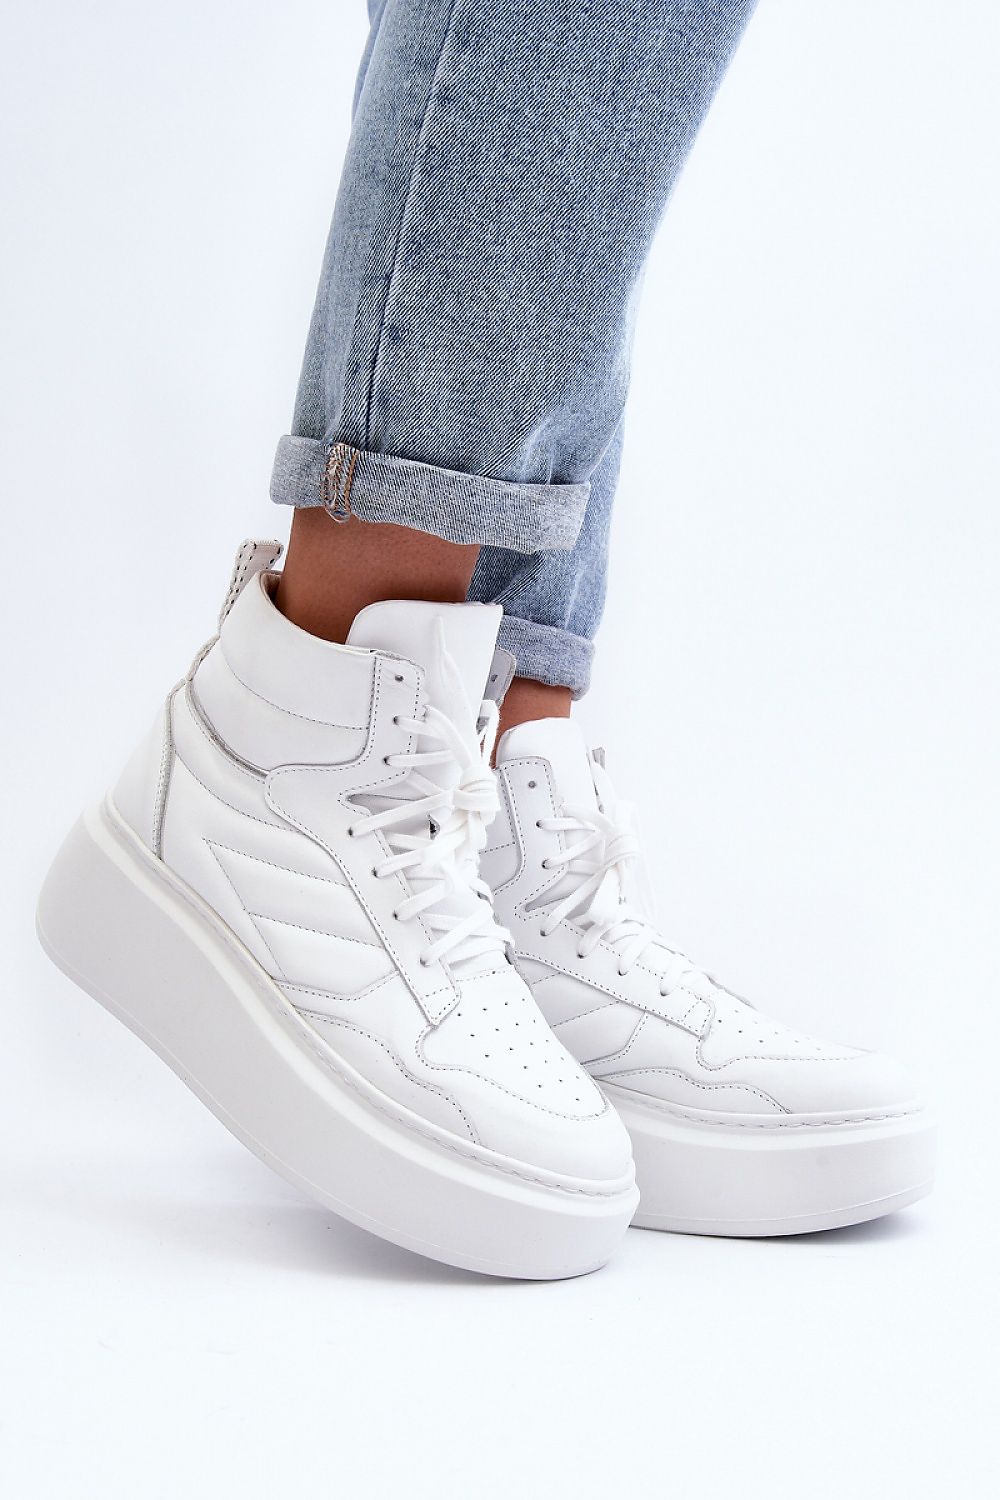 White Natural Leather High Platform Sneakers